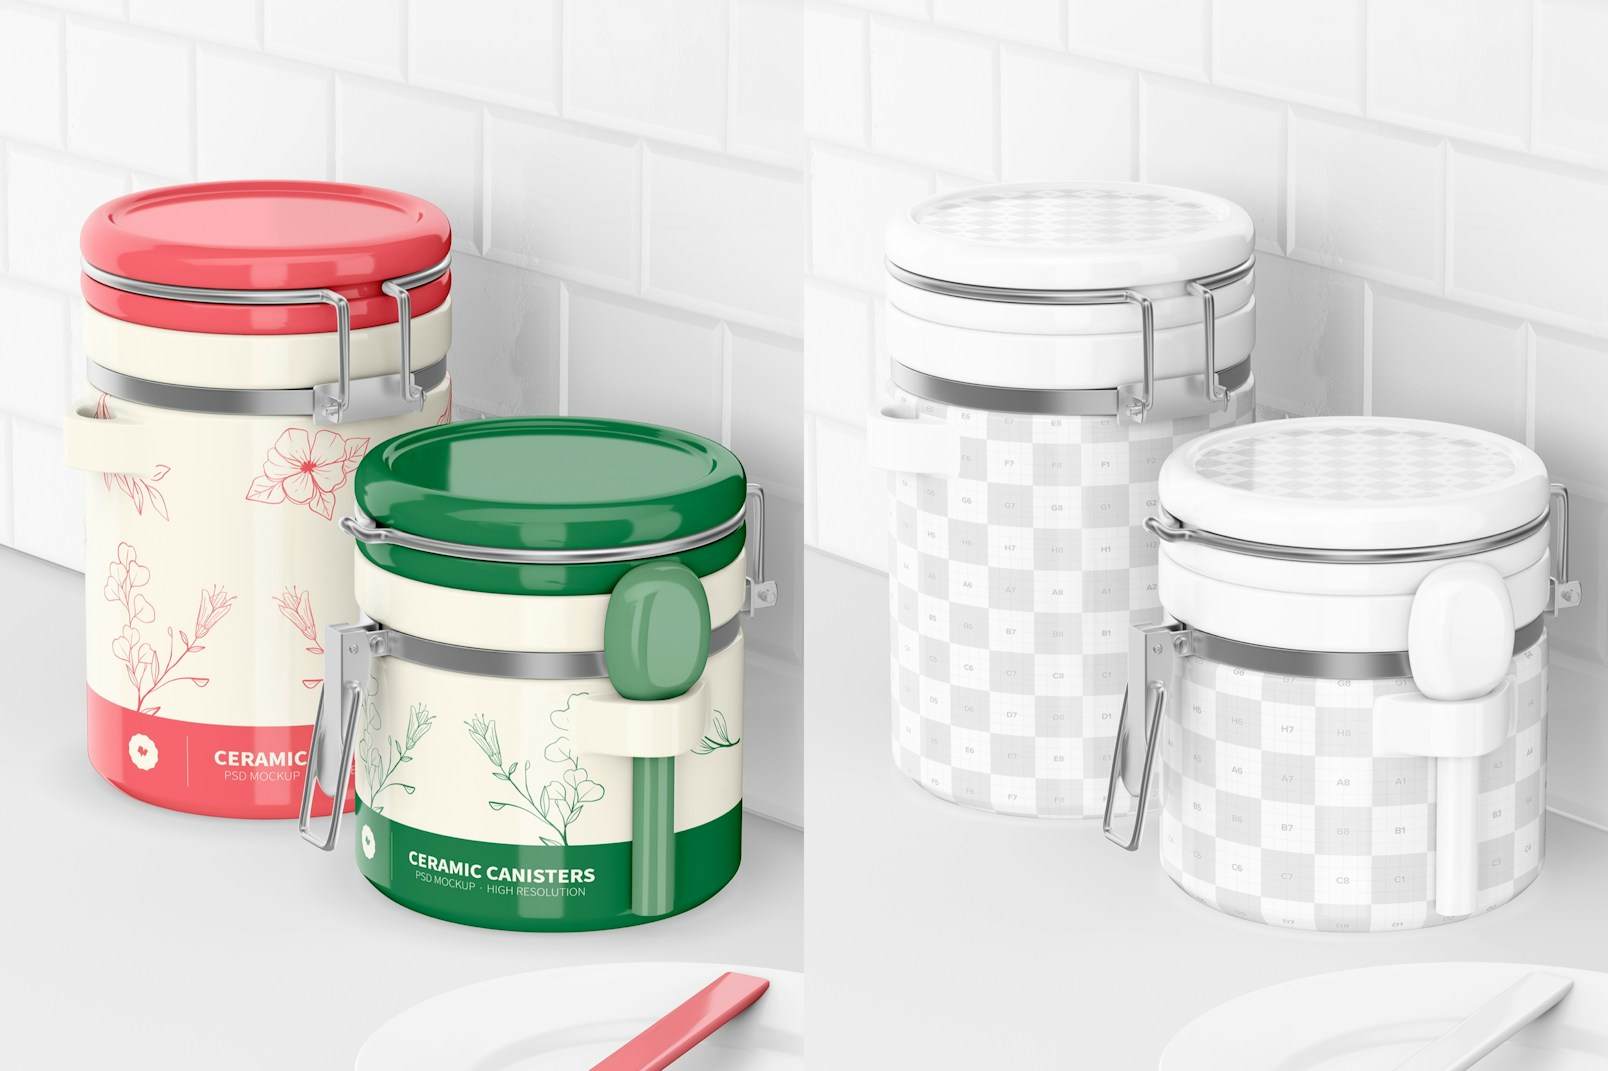 Ceramic Canisters with Spoon Mockup, Perspective